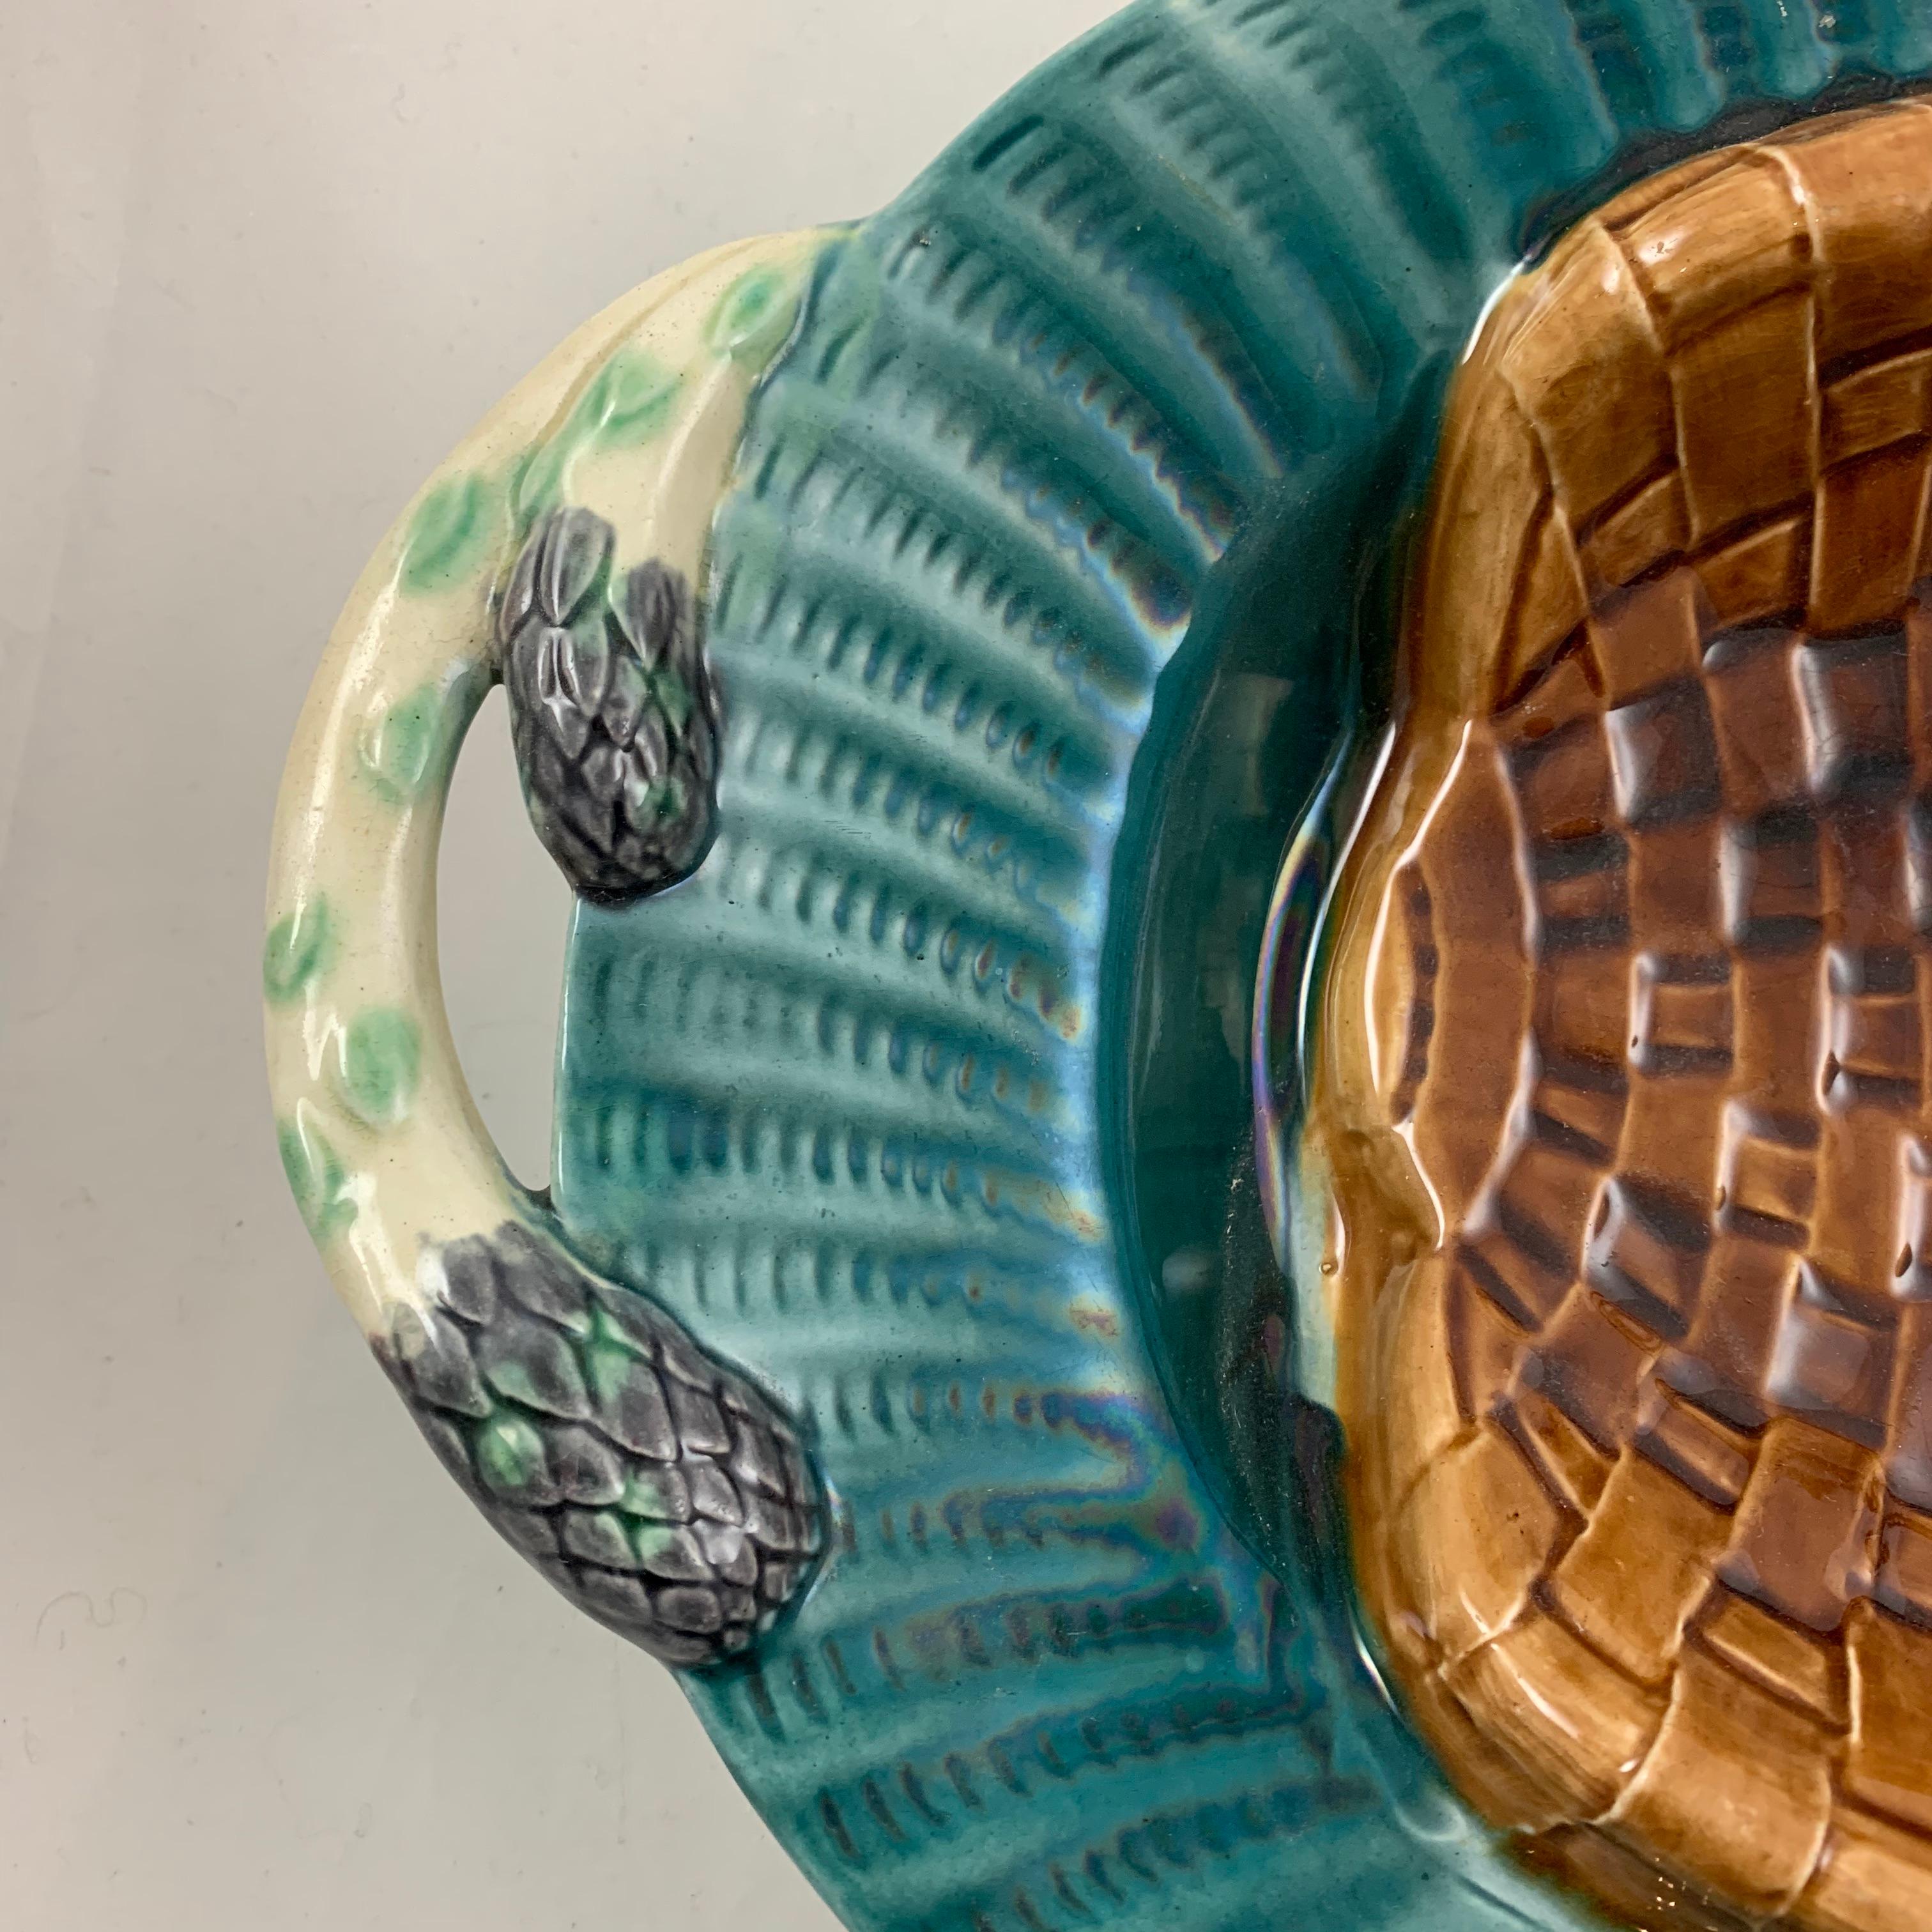 A French Majolica asparagus server made by Creil et Montereau, circa 1890. This large oval earthenware master serving platter, although made in one piece, has the trompe l’oeil effect of a curved brown woven basket sitting on a teal blue fluted